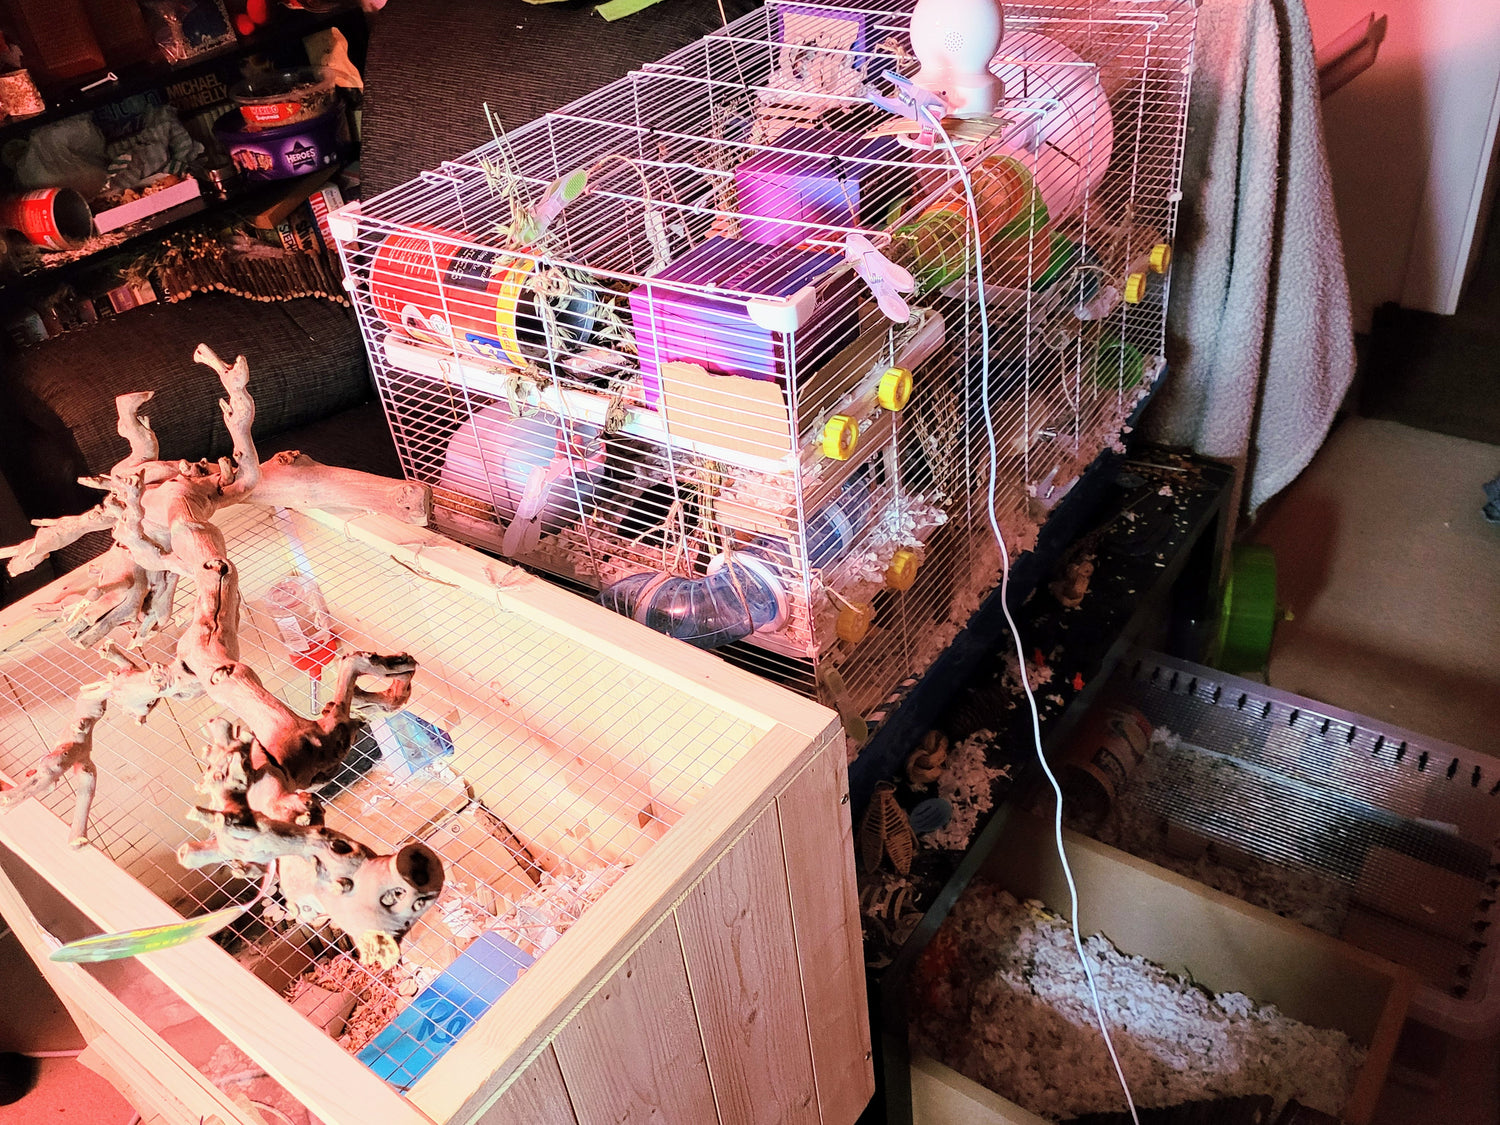 Two hamster cages joined together, beneath the table that the hamster cage is on is a hamster dig box and a hamster play pen